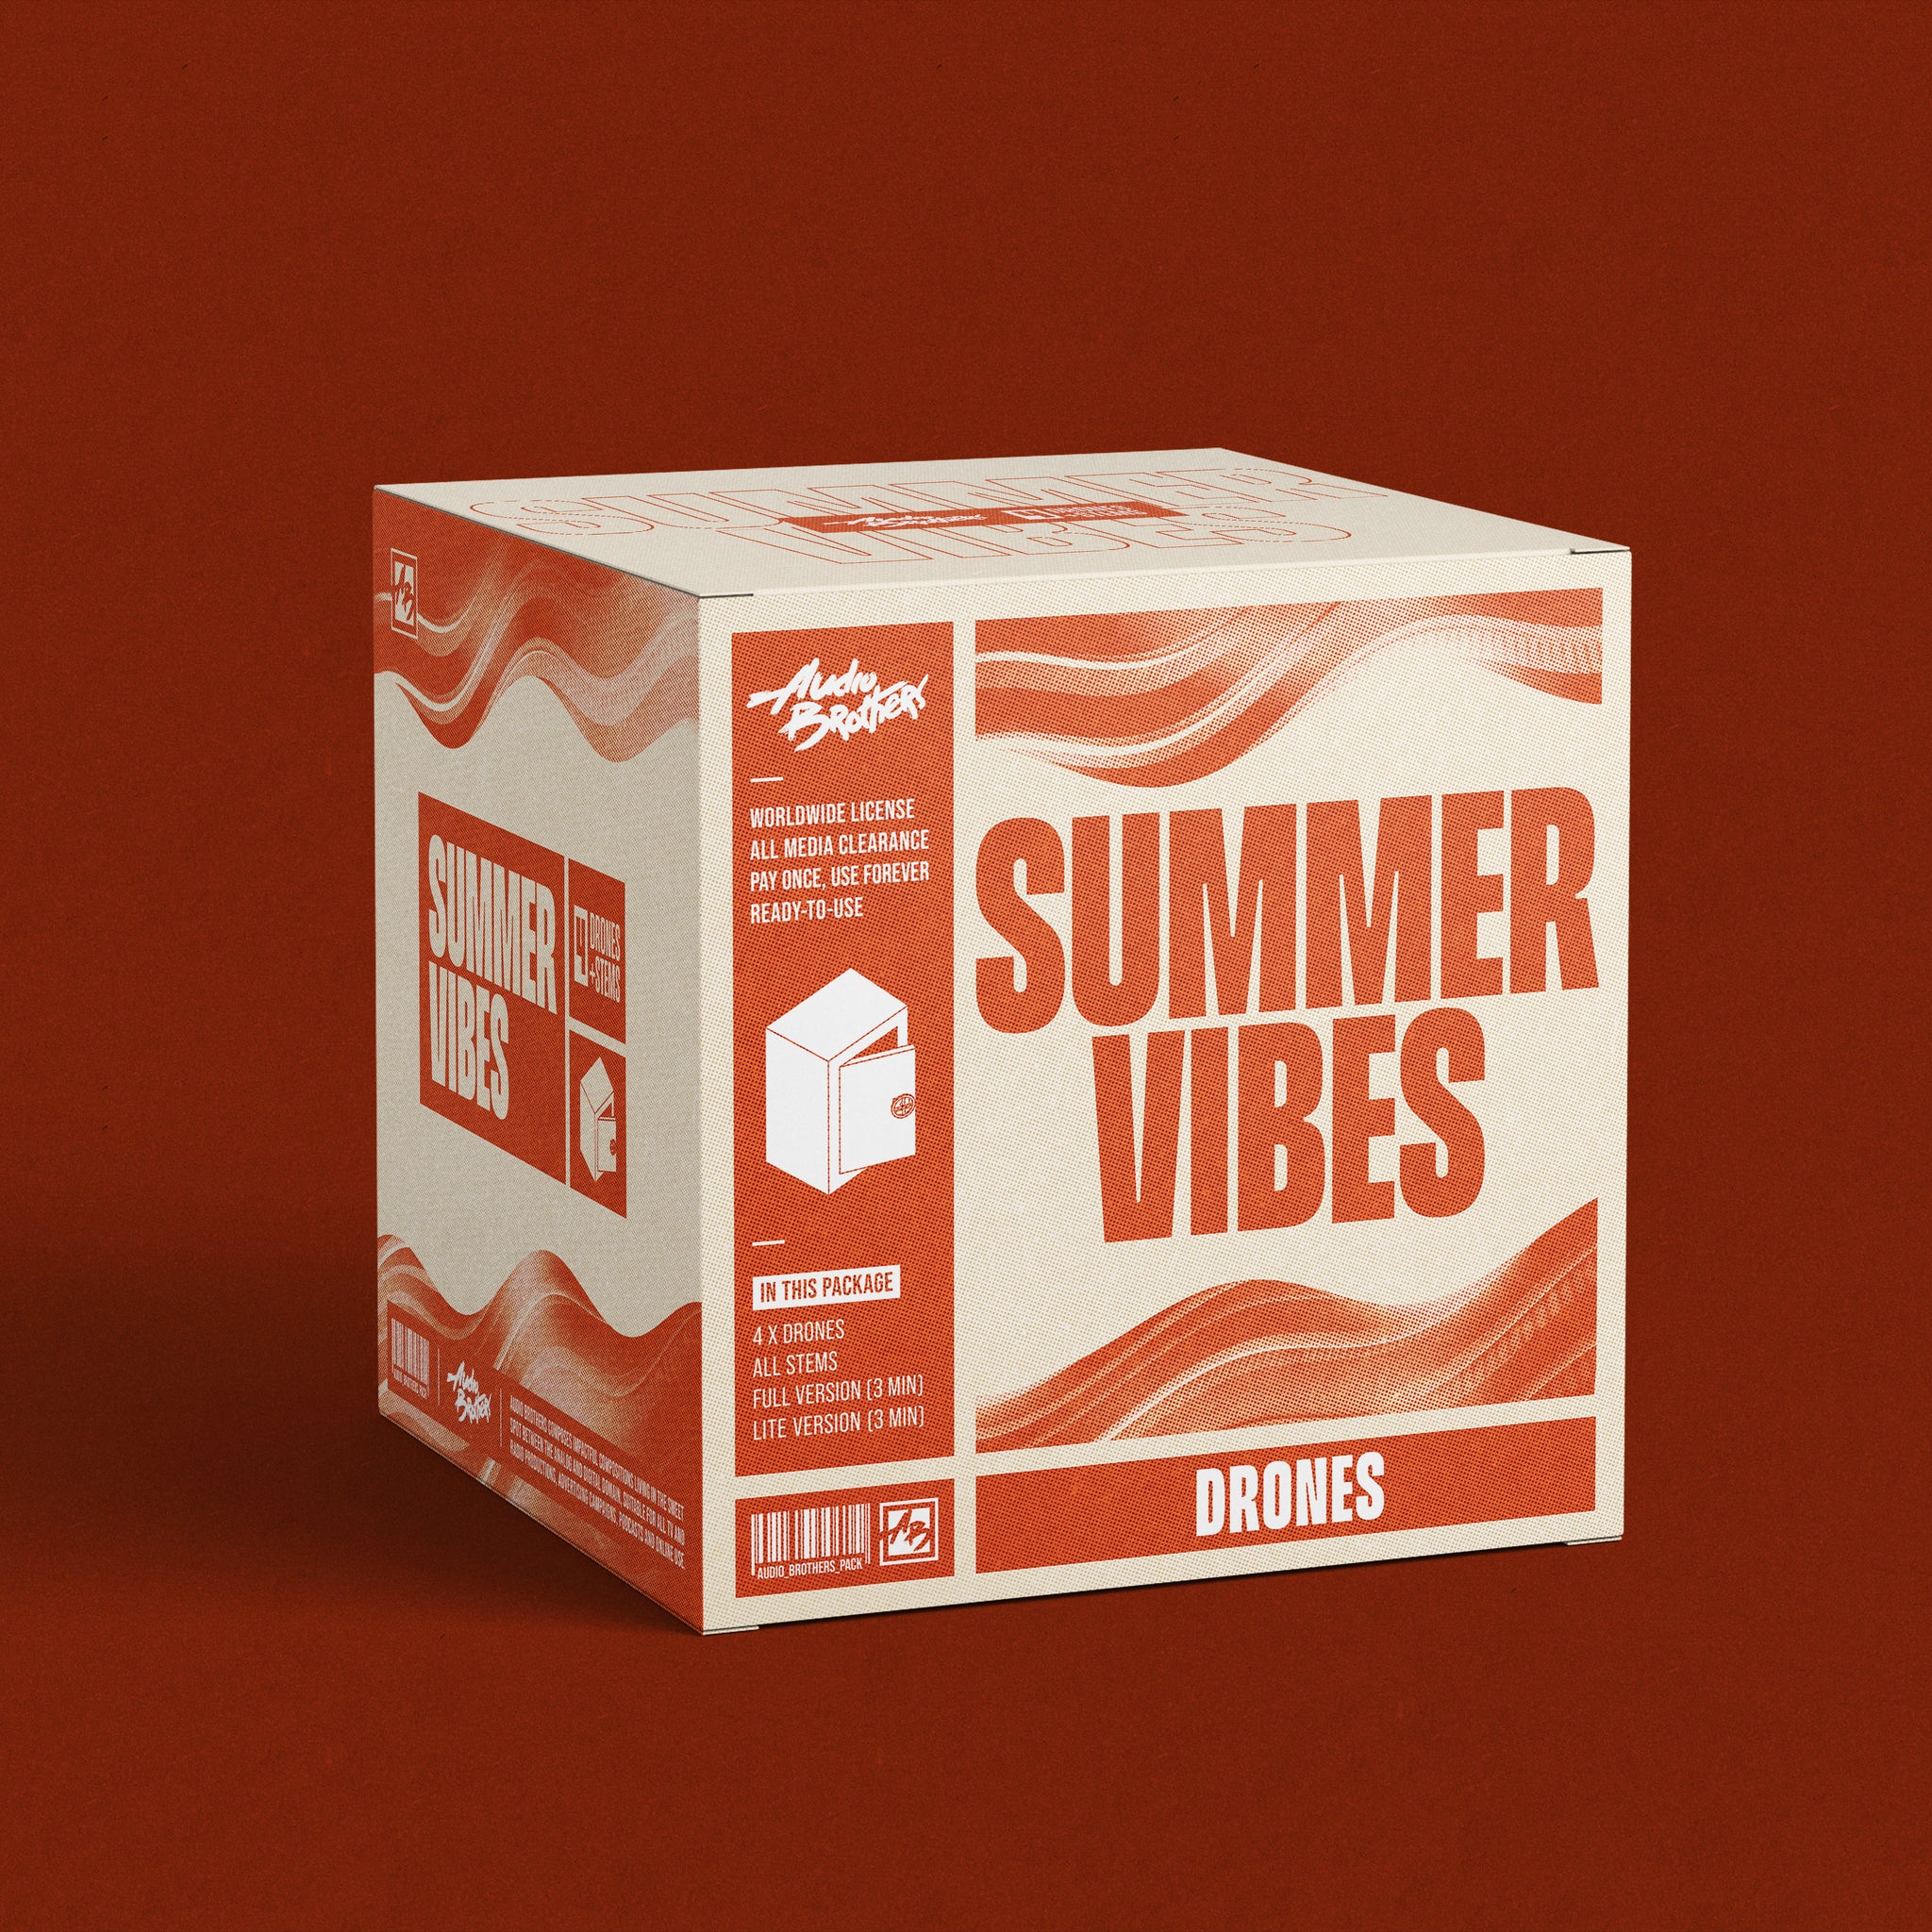 4x Drones - Summer Vibes